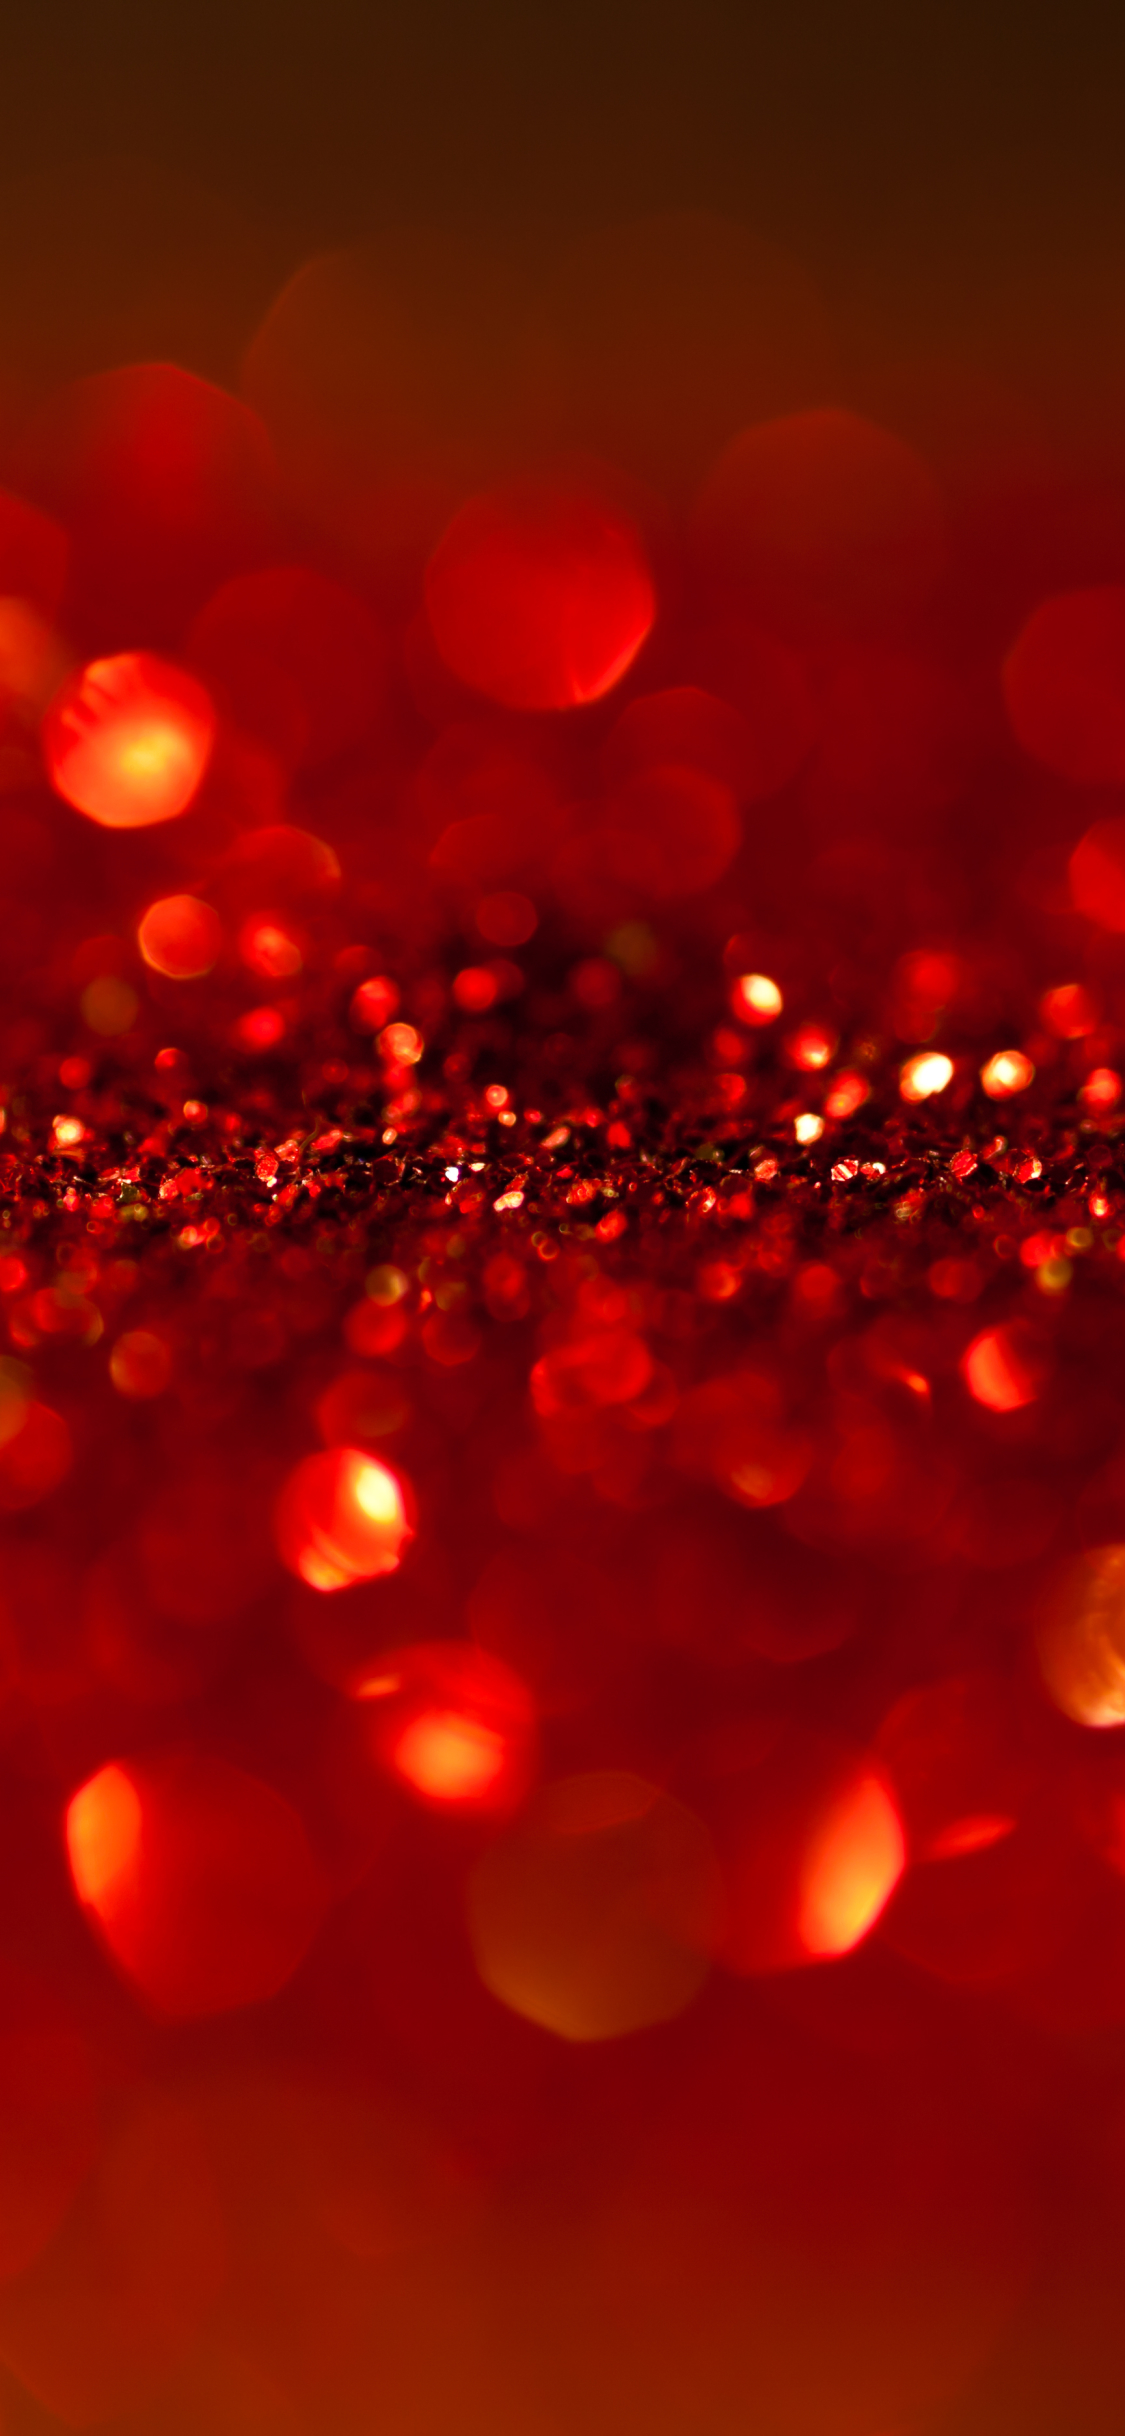 1315984 free download Red wallpapers for phone,  Red images and screensavers for mobile